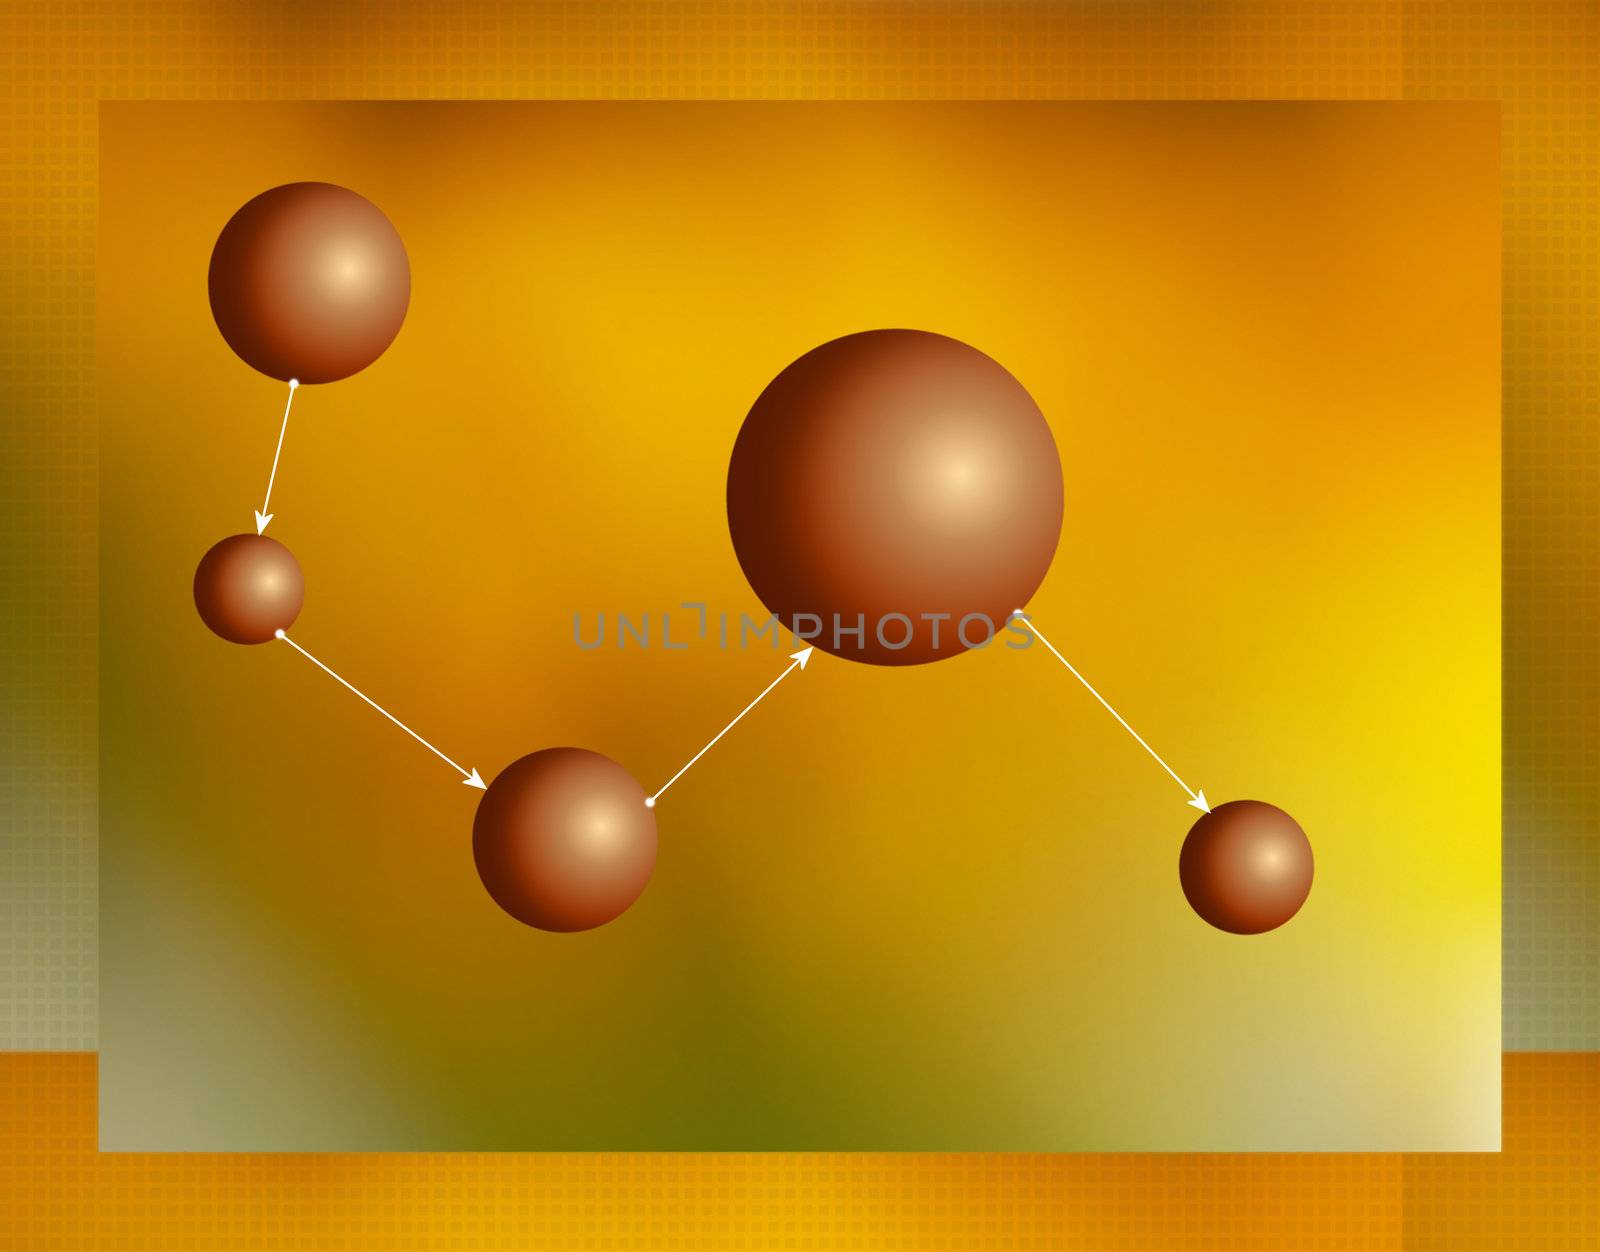 atom chain illustration with pointers